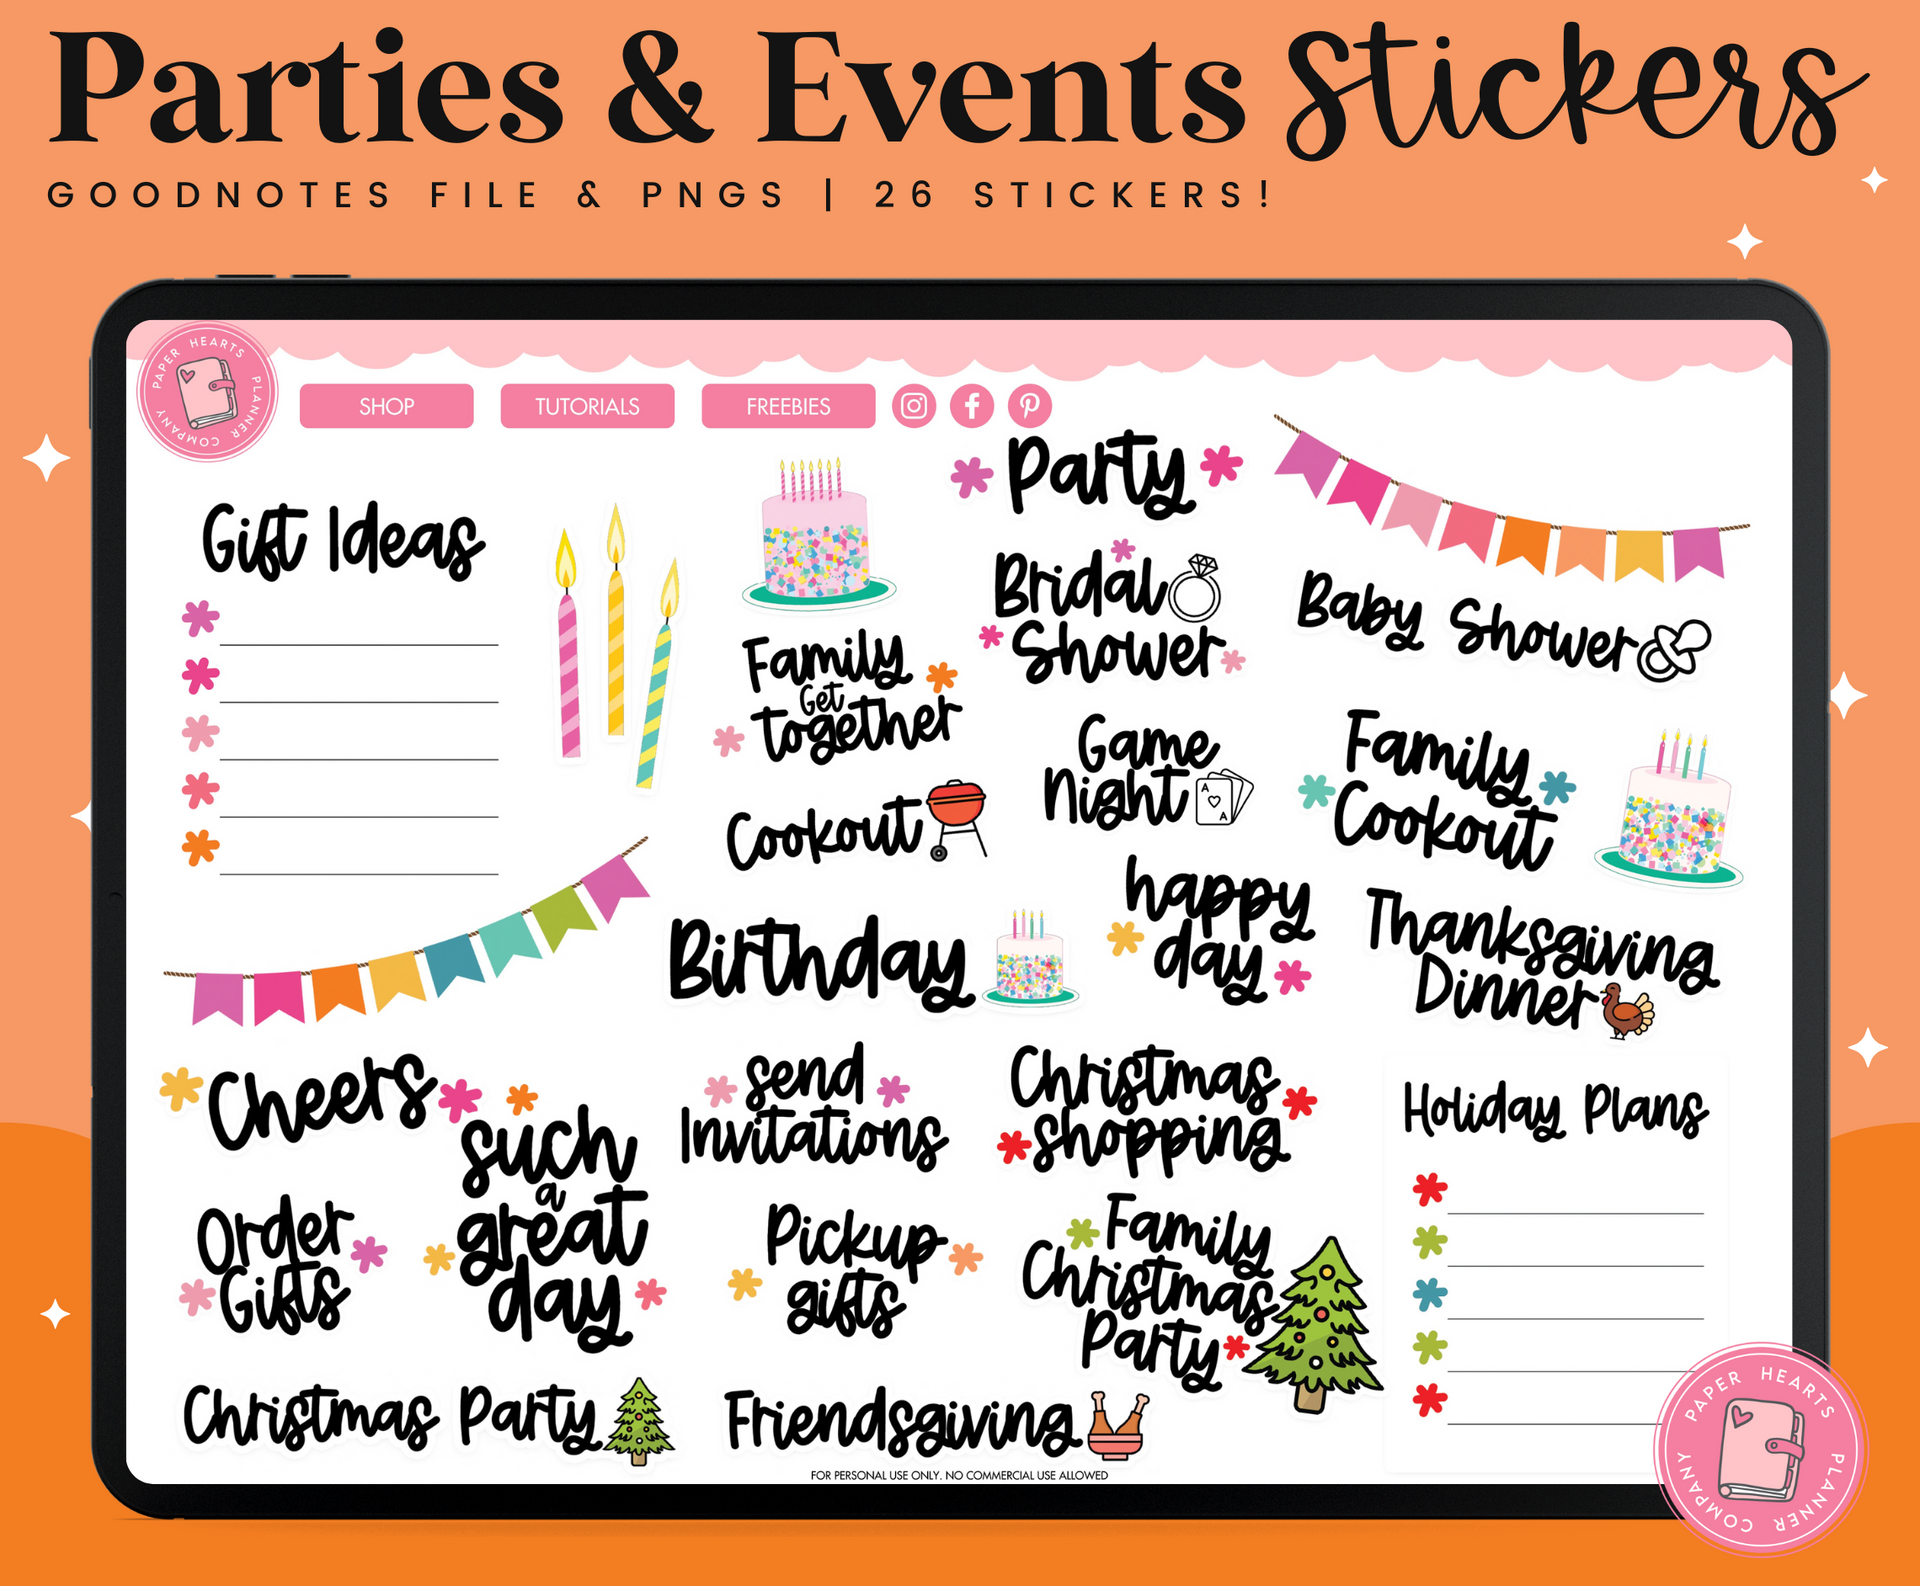 Wedding Stickers – Paper Hearts Planner Co.